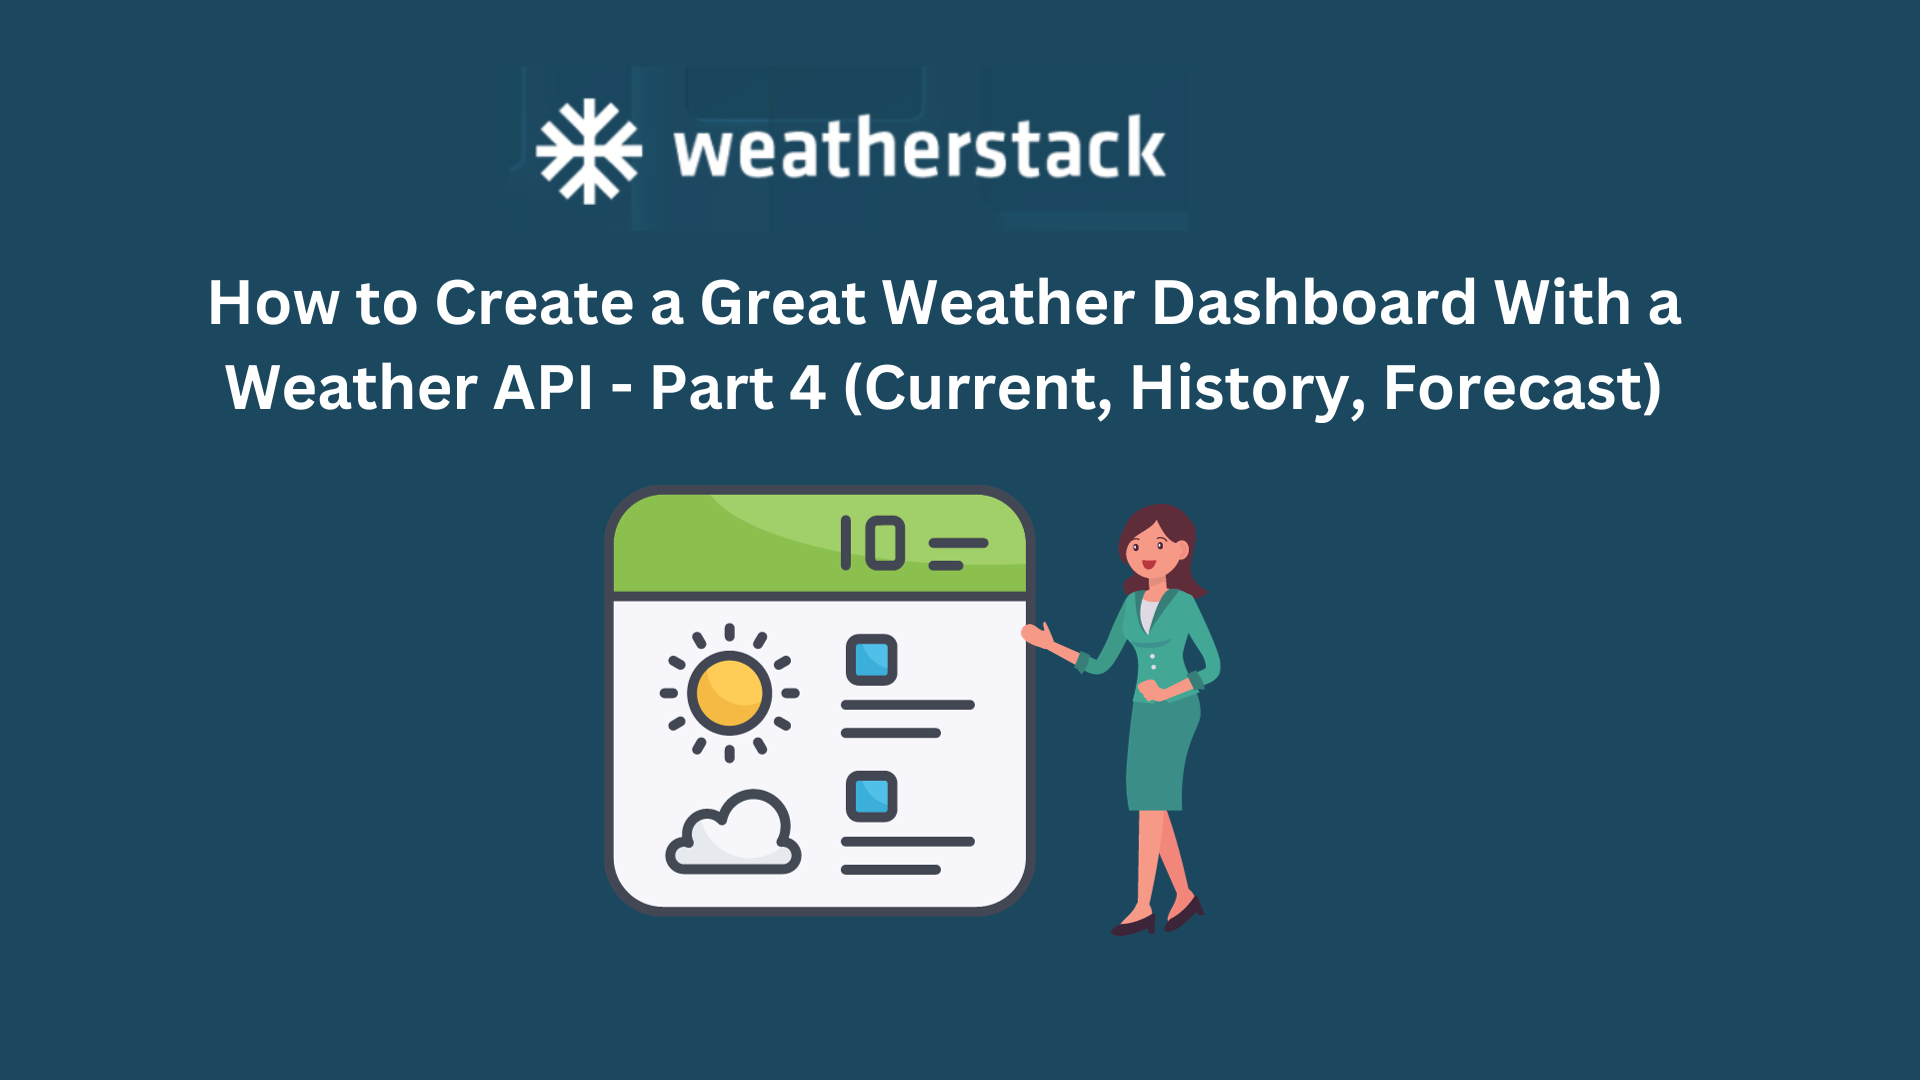 How to Create a Great Weather Dashboard With a Weather API - Part 4 (Current, History, Forecast)